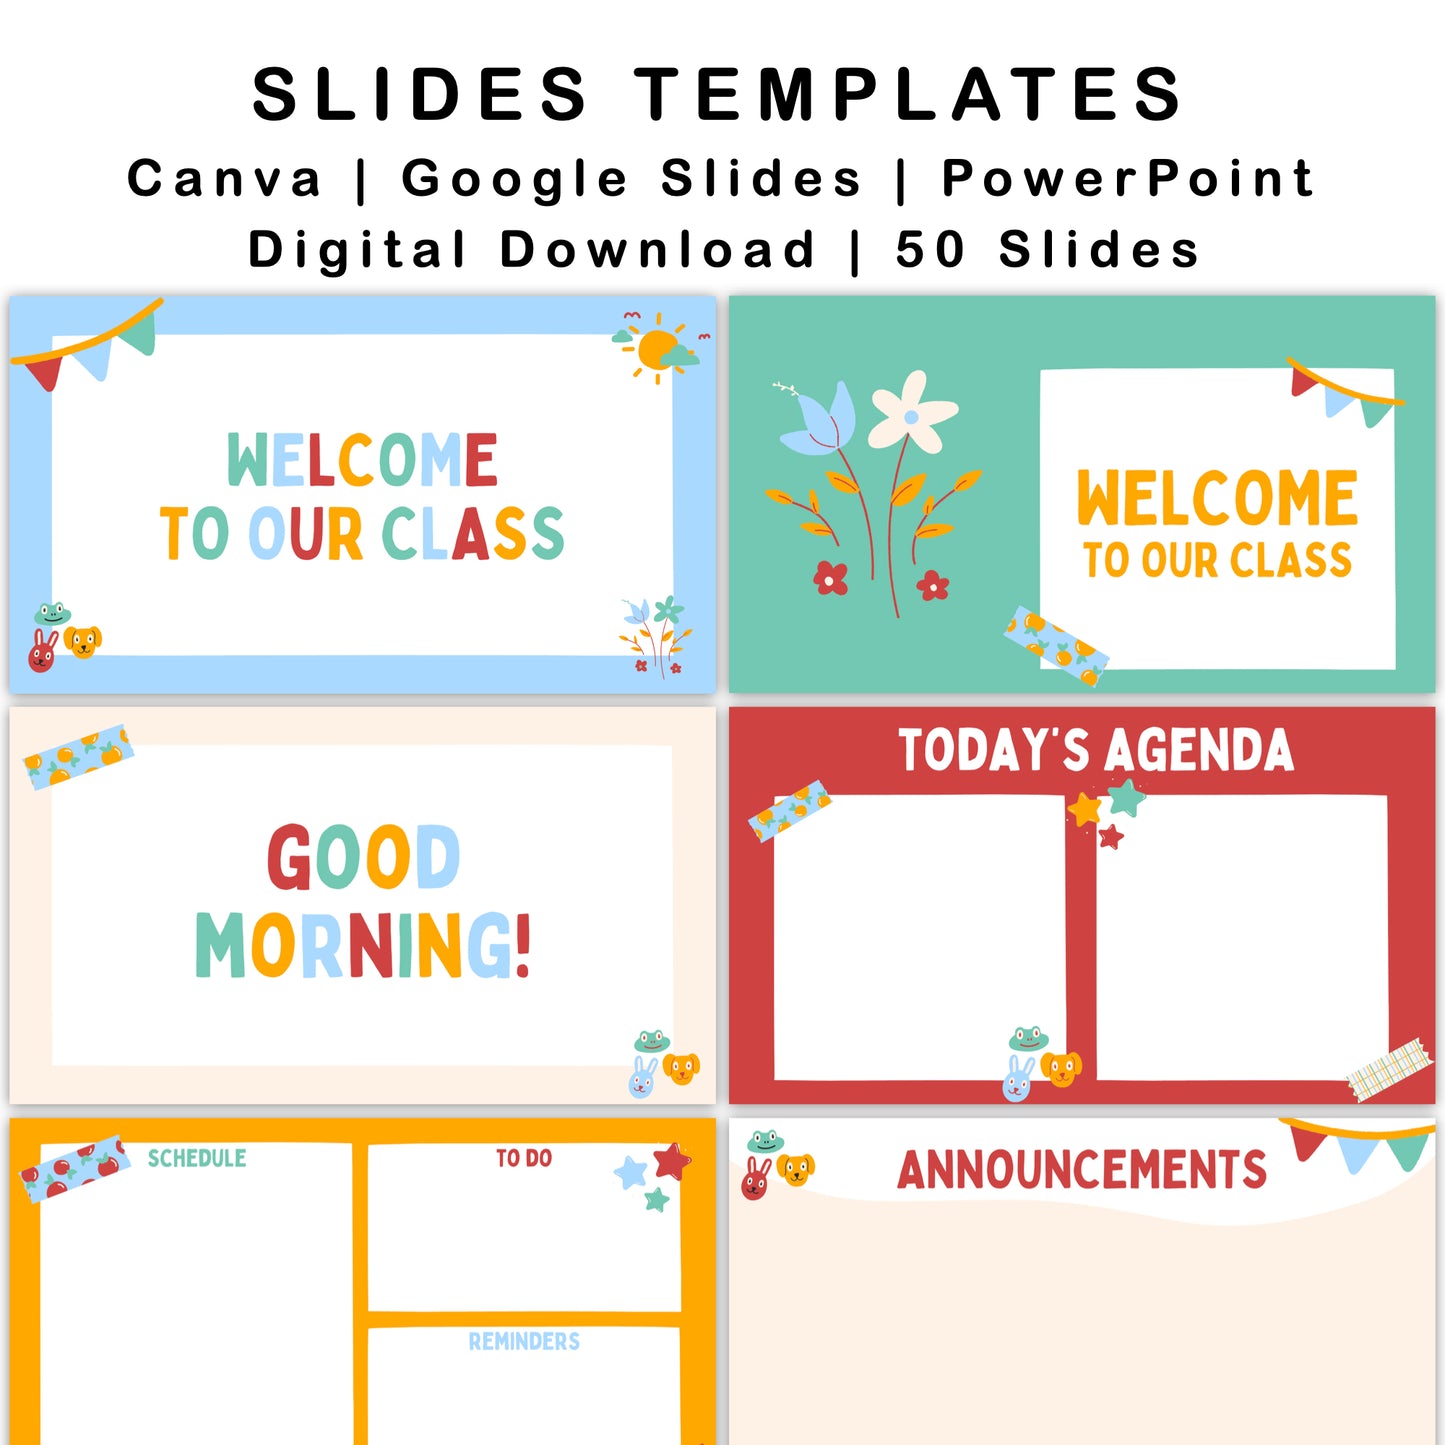 Google Slides Templates Daily Agenda | PowerPoint - Colorful Doodle Theme